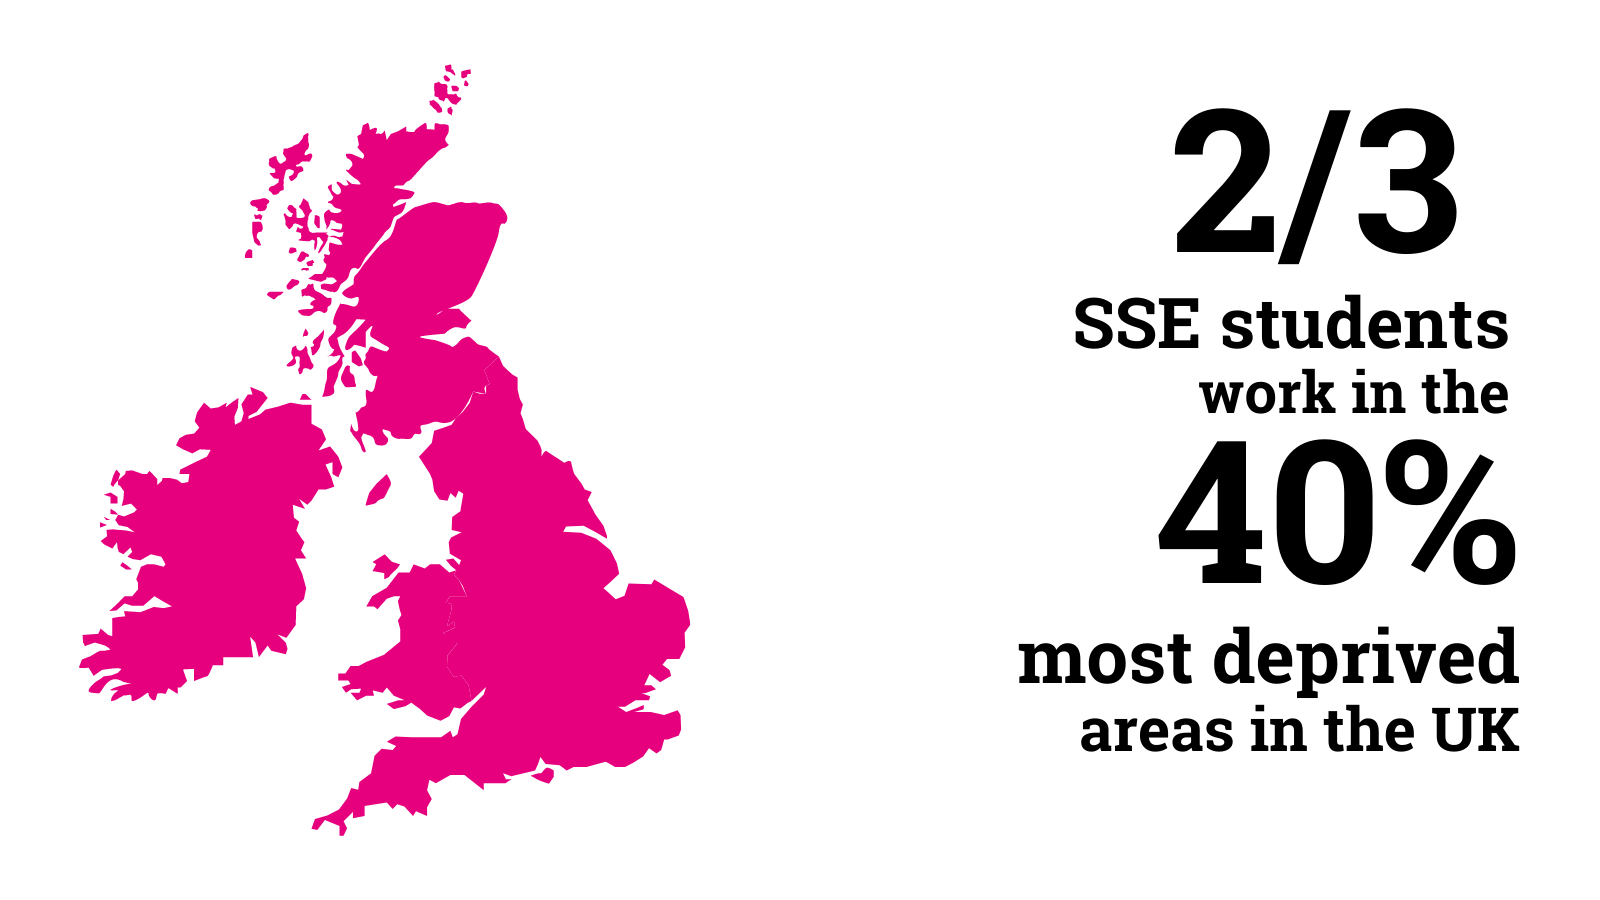 Infographic - 2/3 SSE students work in the 40% most deprived areas in the UK